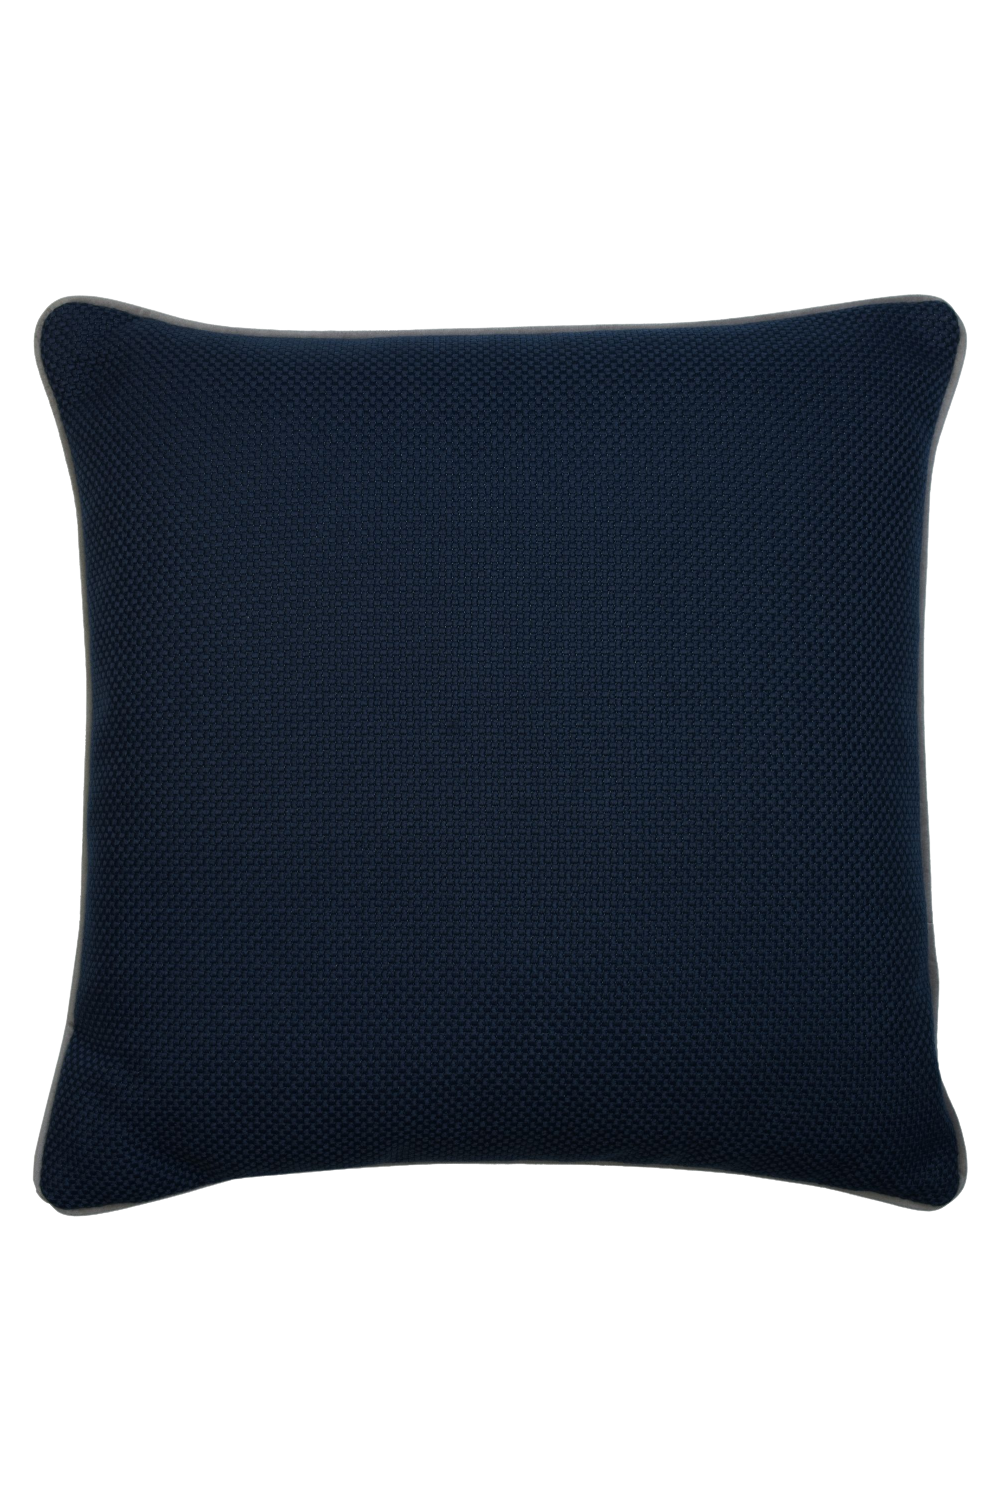 Weave Outdoor Cushion With Piping | Andrew Martin Taglioni | Oroa.com